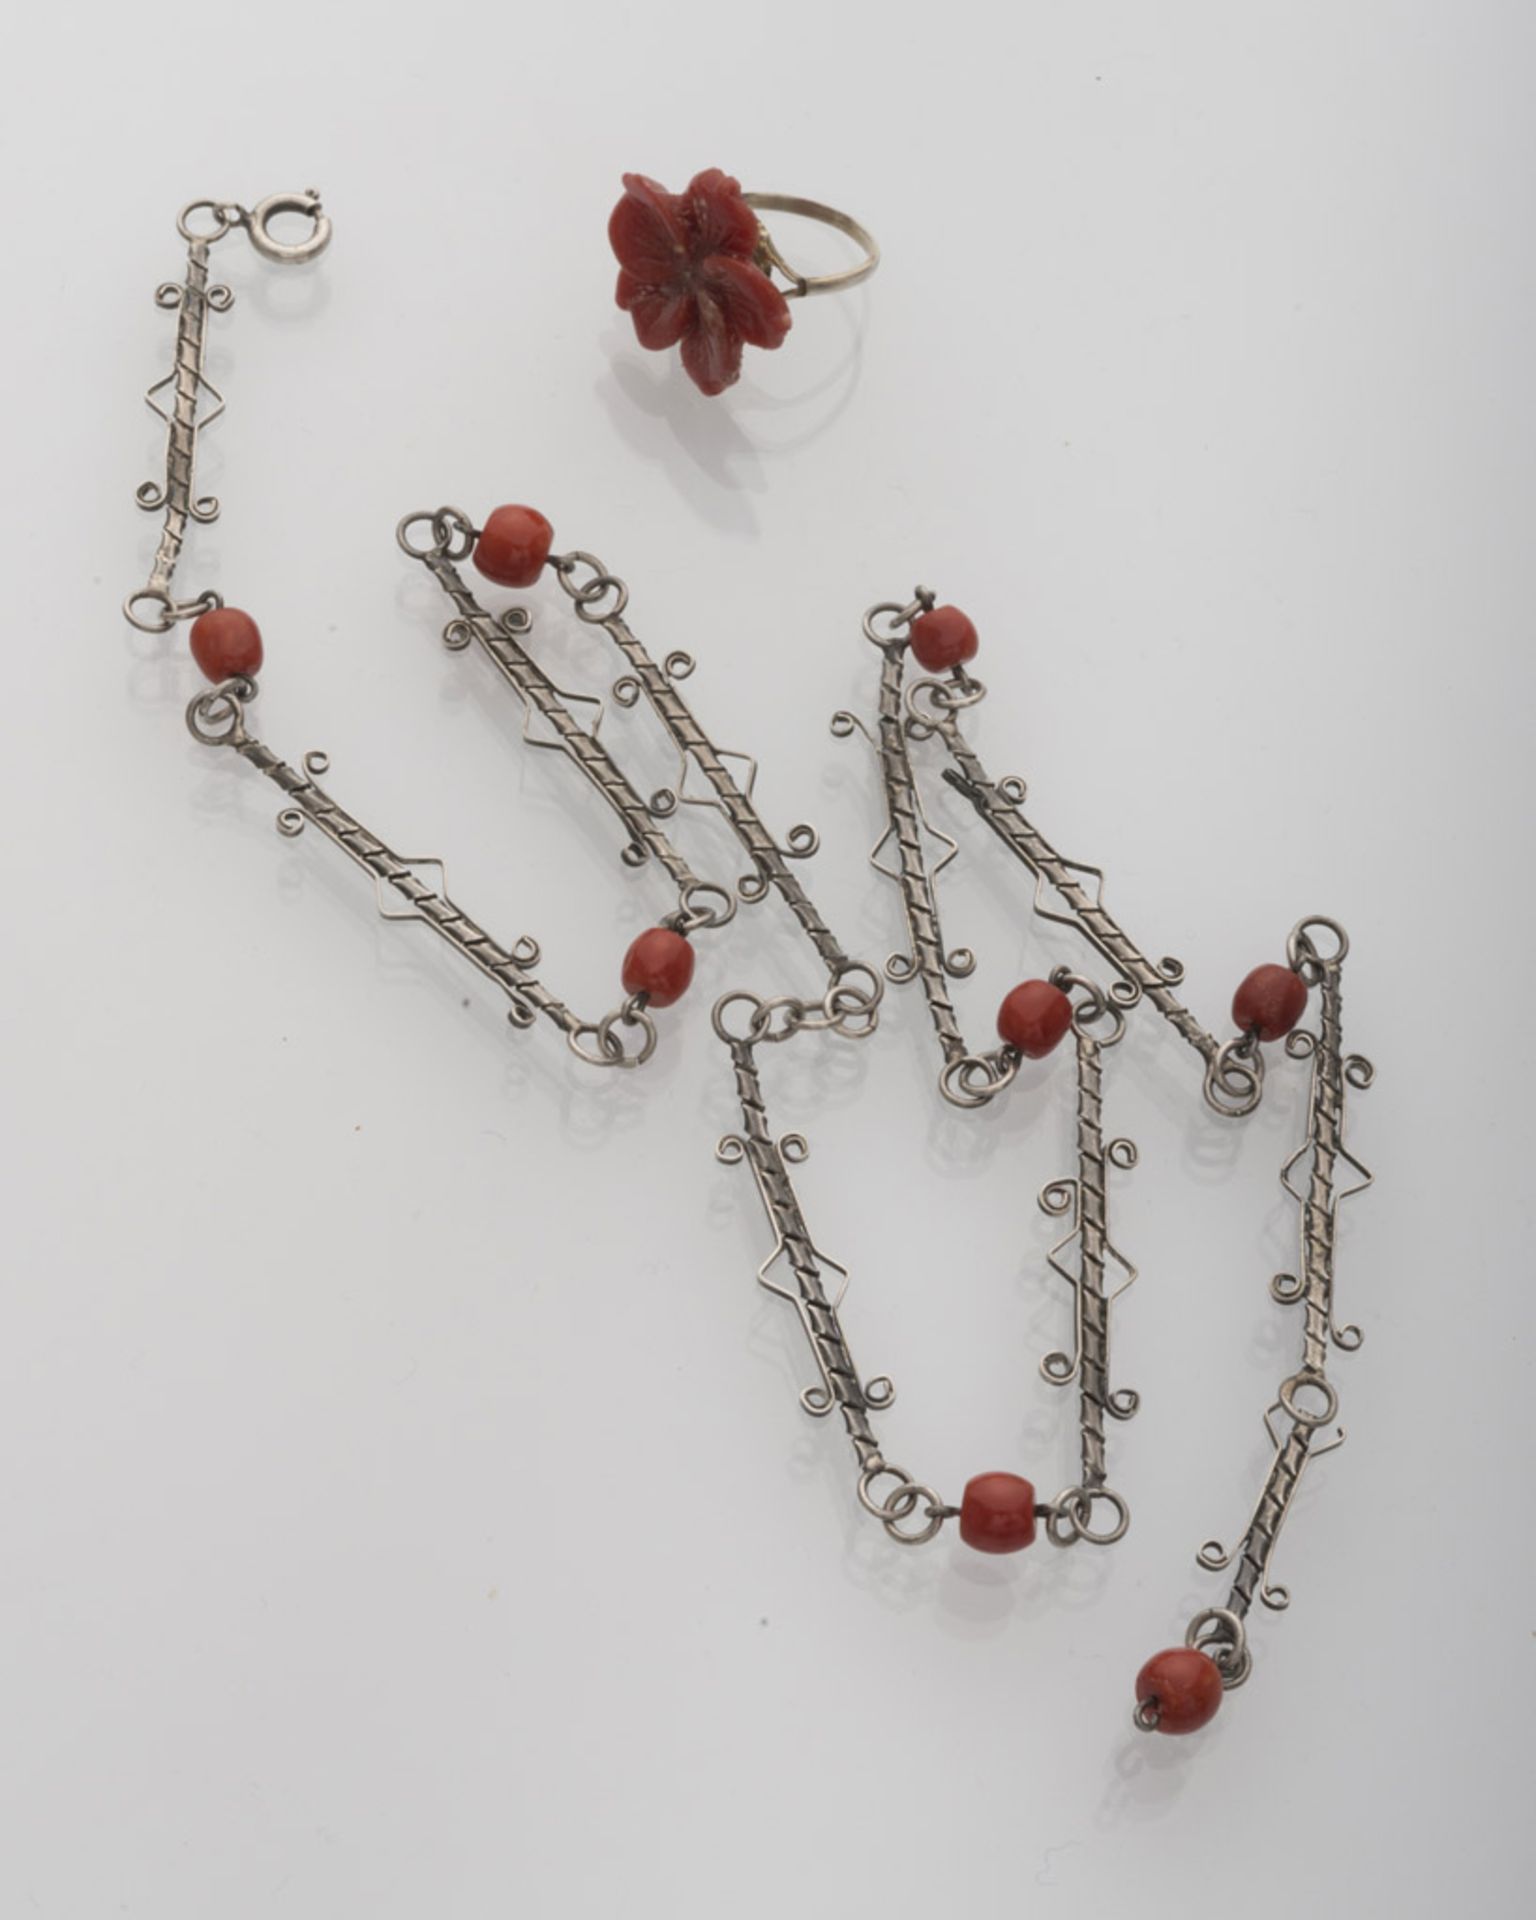 PARURE OF EARRINGS, CHOKER, RING AND PENDANT in silver and red coral. Pendant with Roman coin and